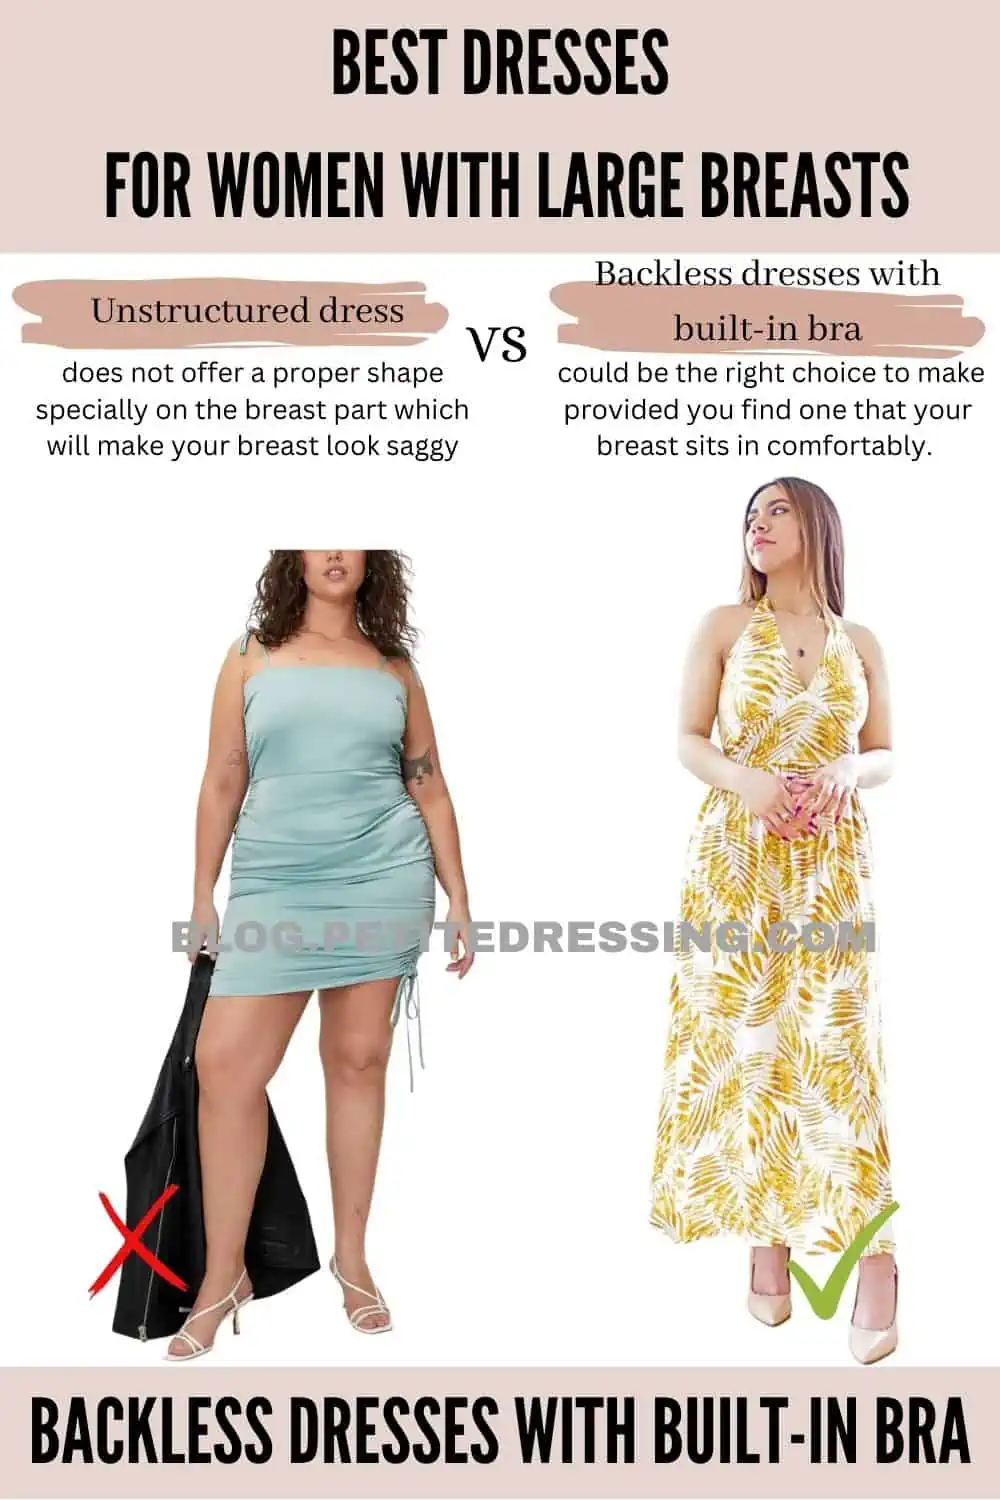 Best outfit ideas for women with big breasts - The Standard Health